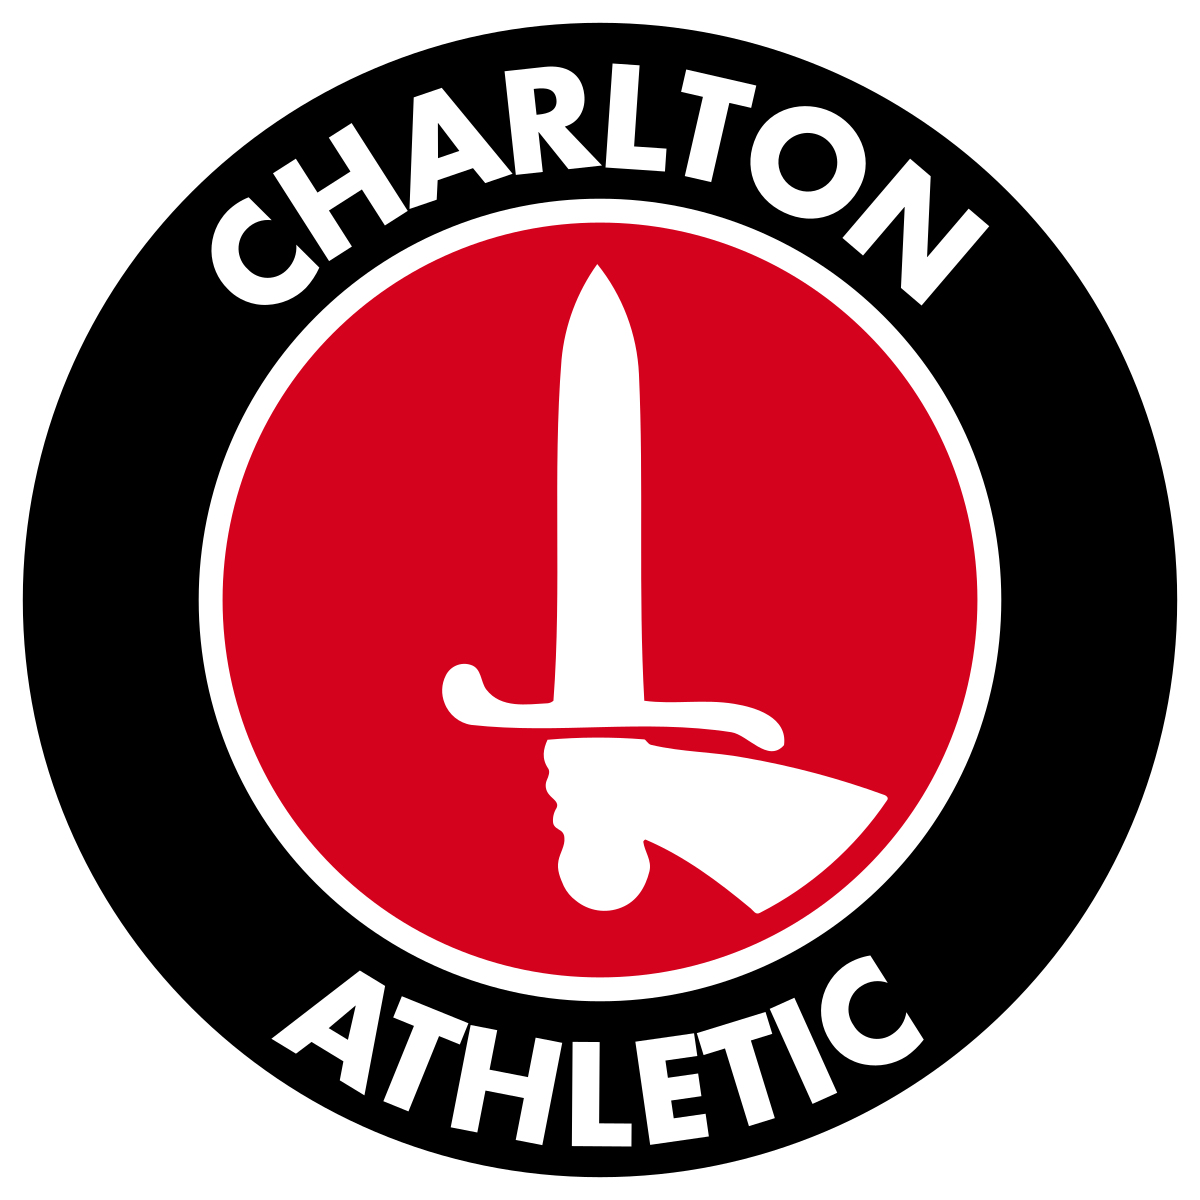 Charlton Athletic away travel and match ticket details